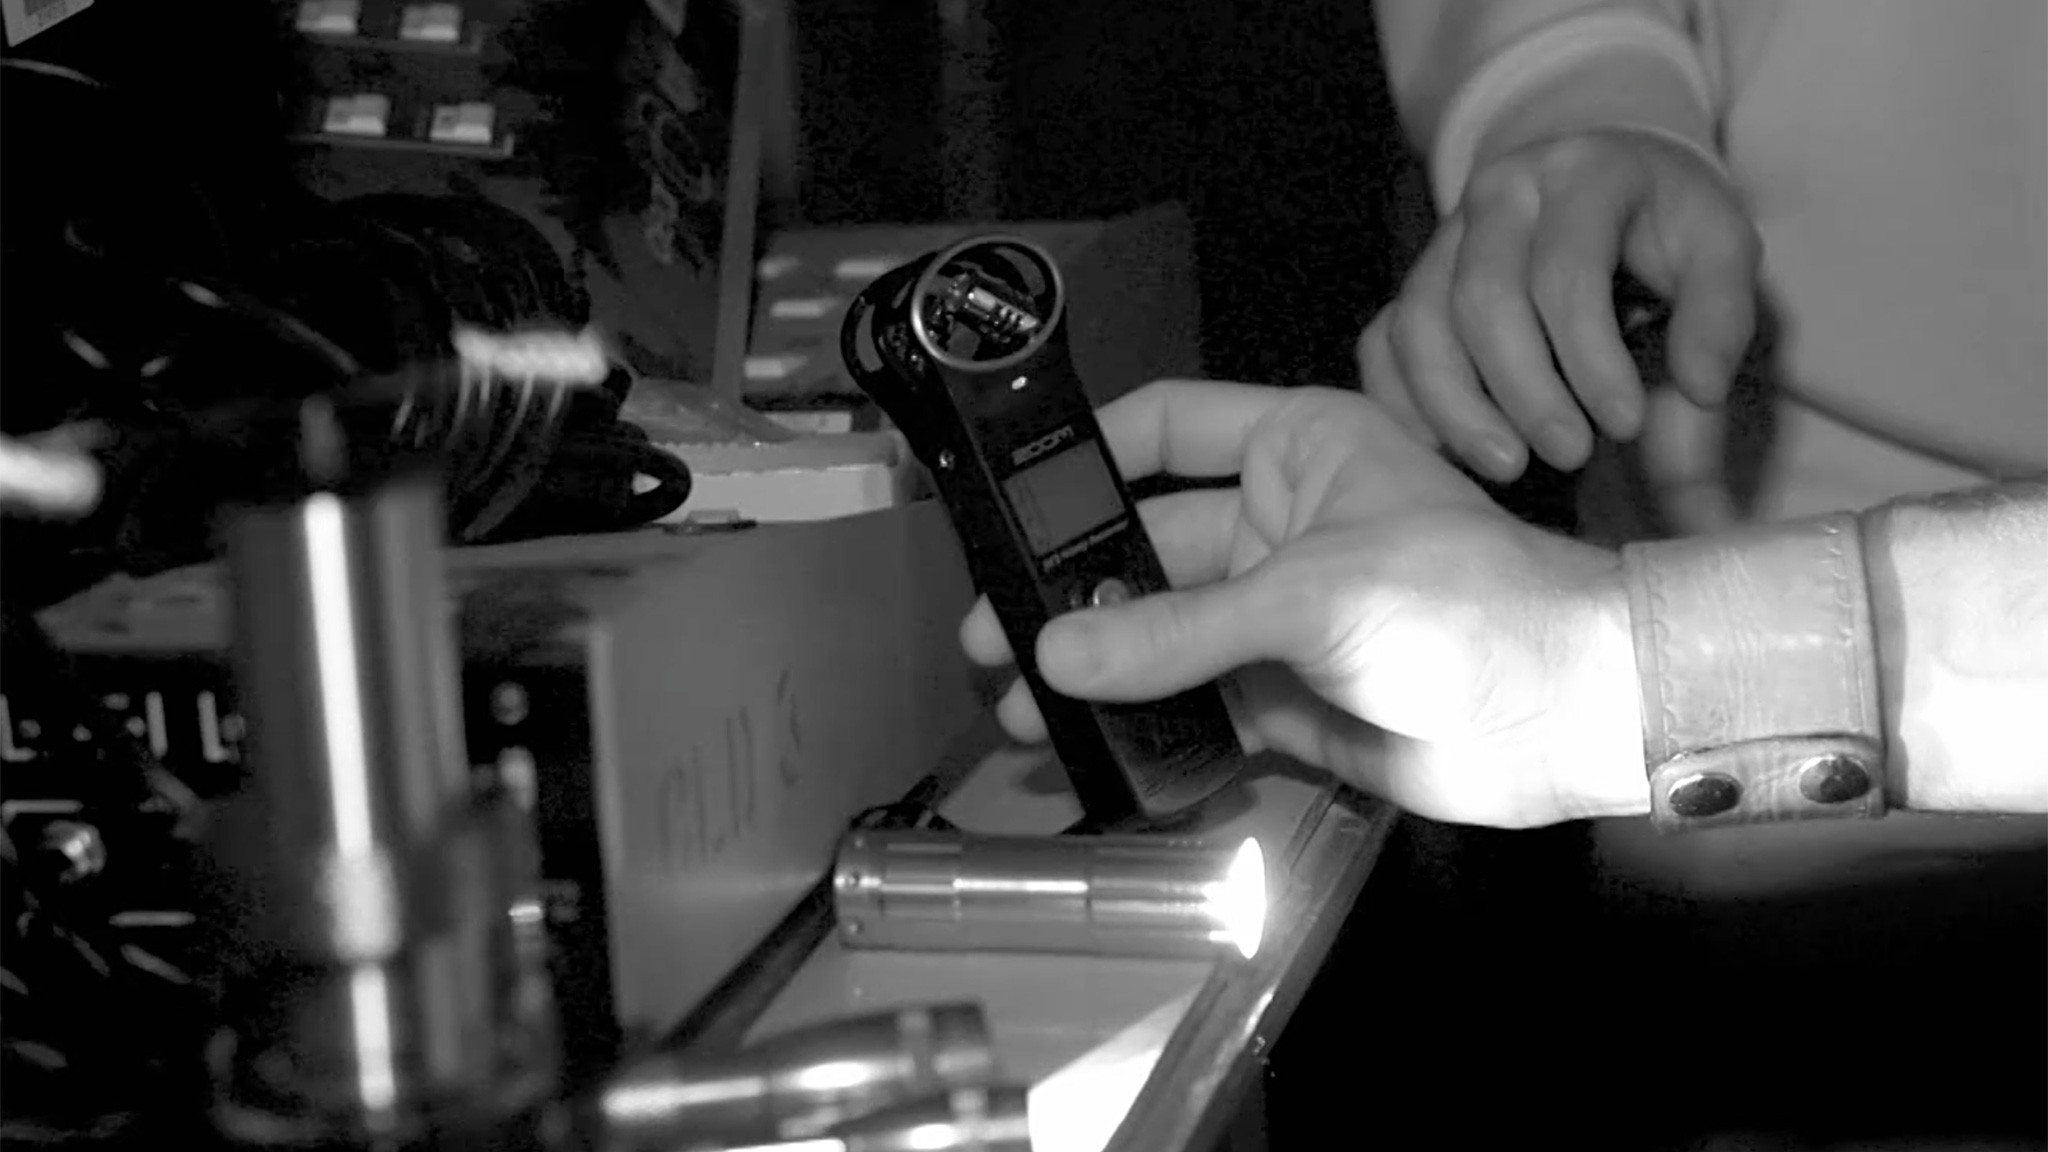 A digital audio recorder in use during a ghost hunt